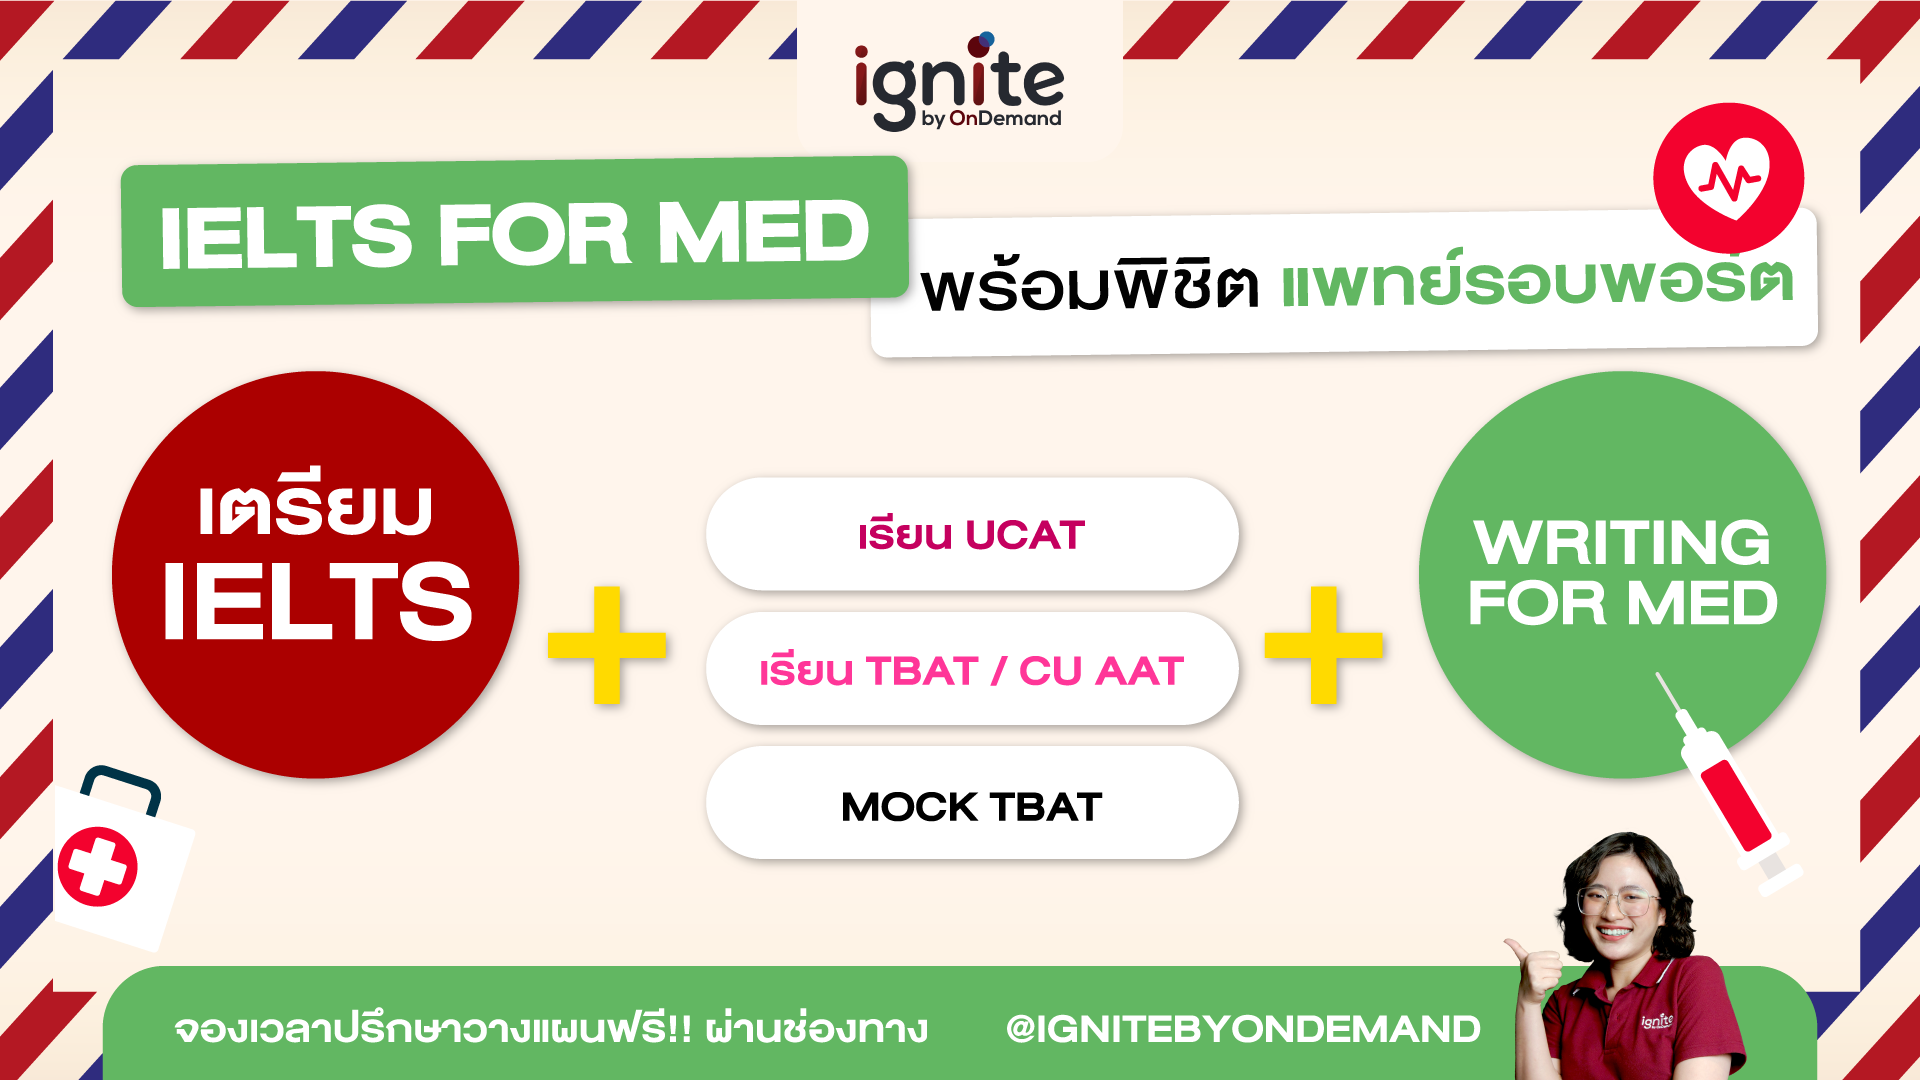 ielts for med - ignite by ondemand